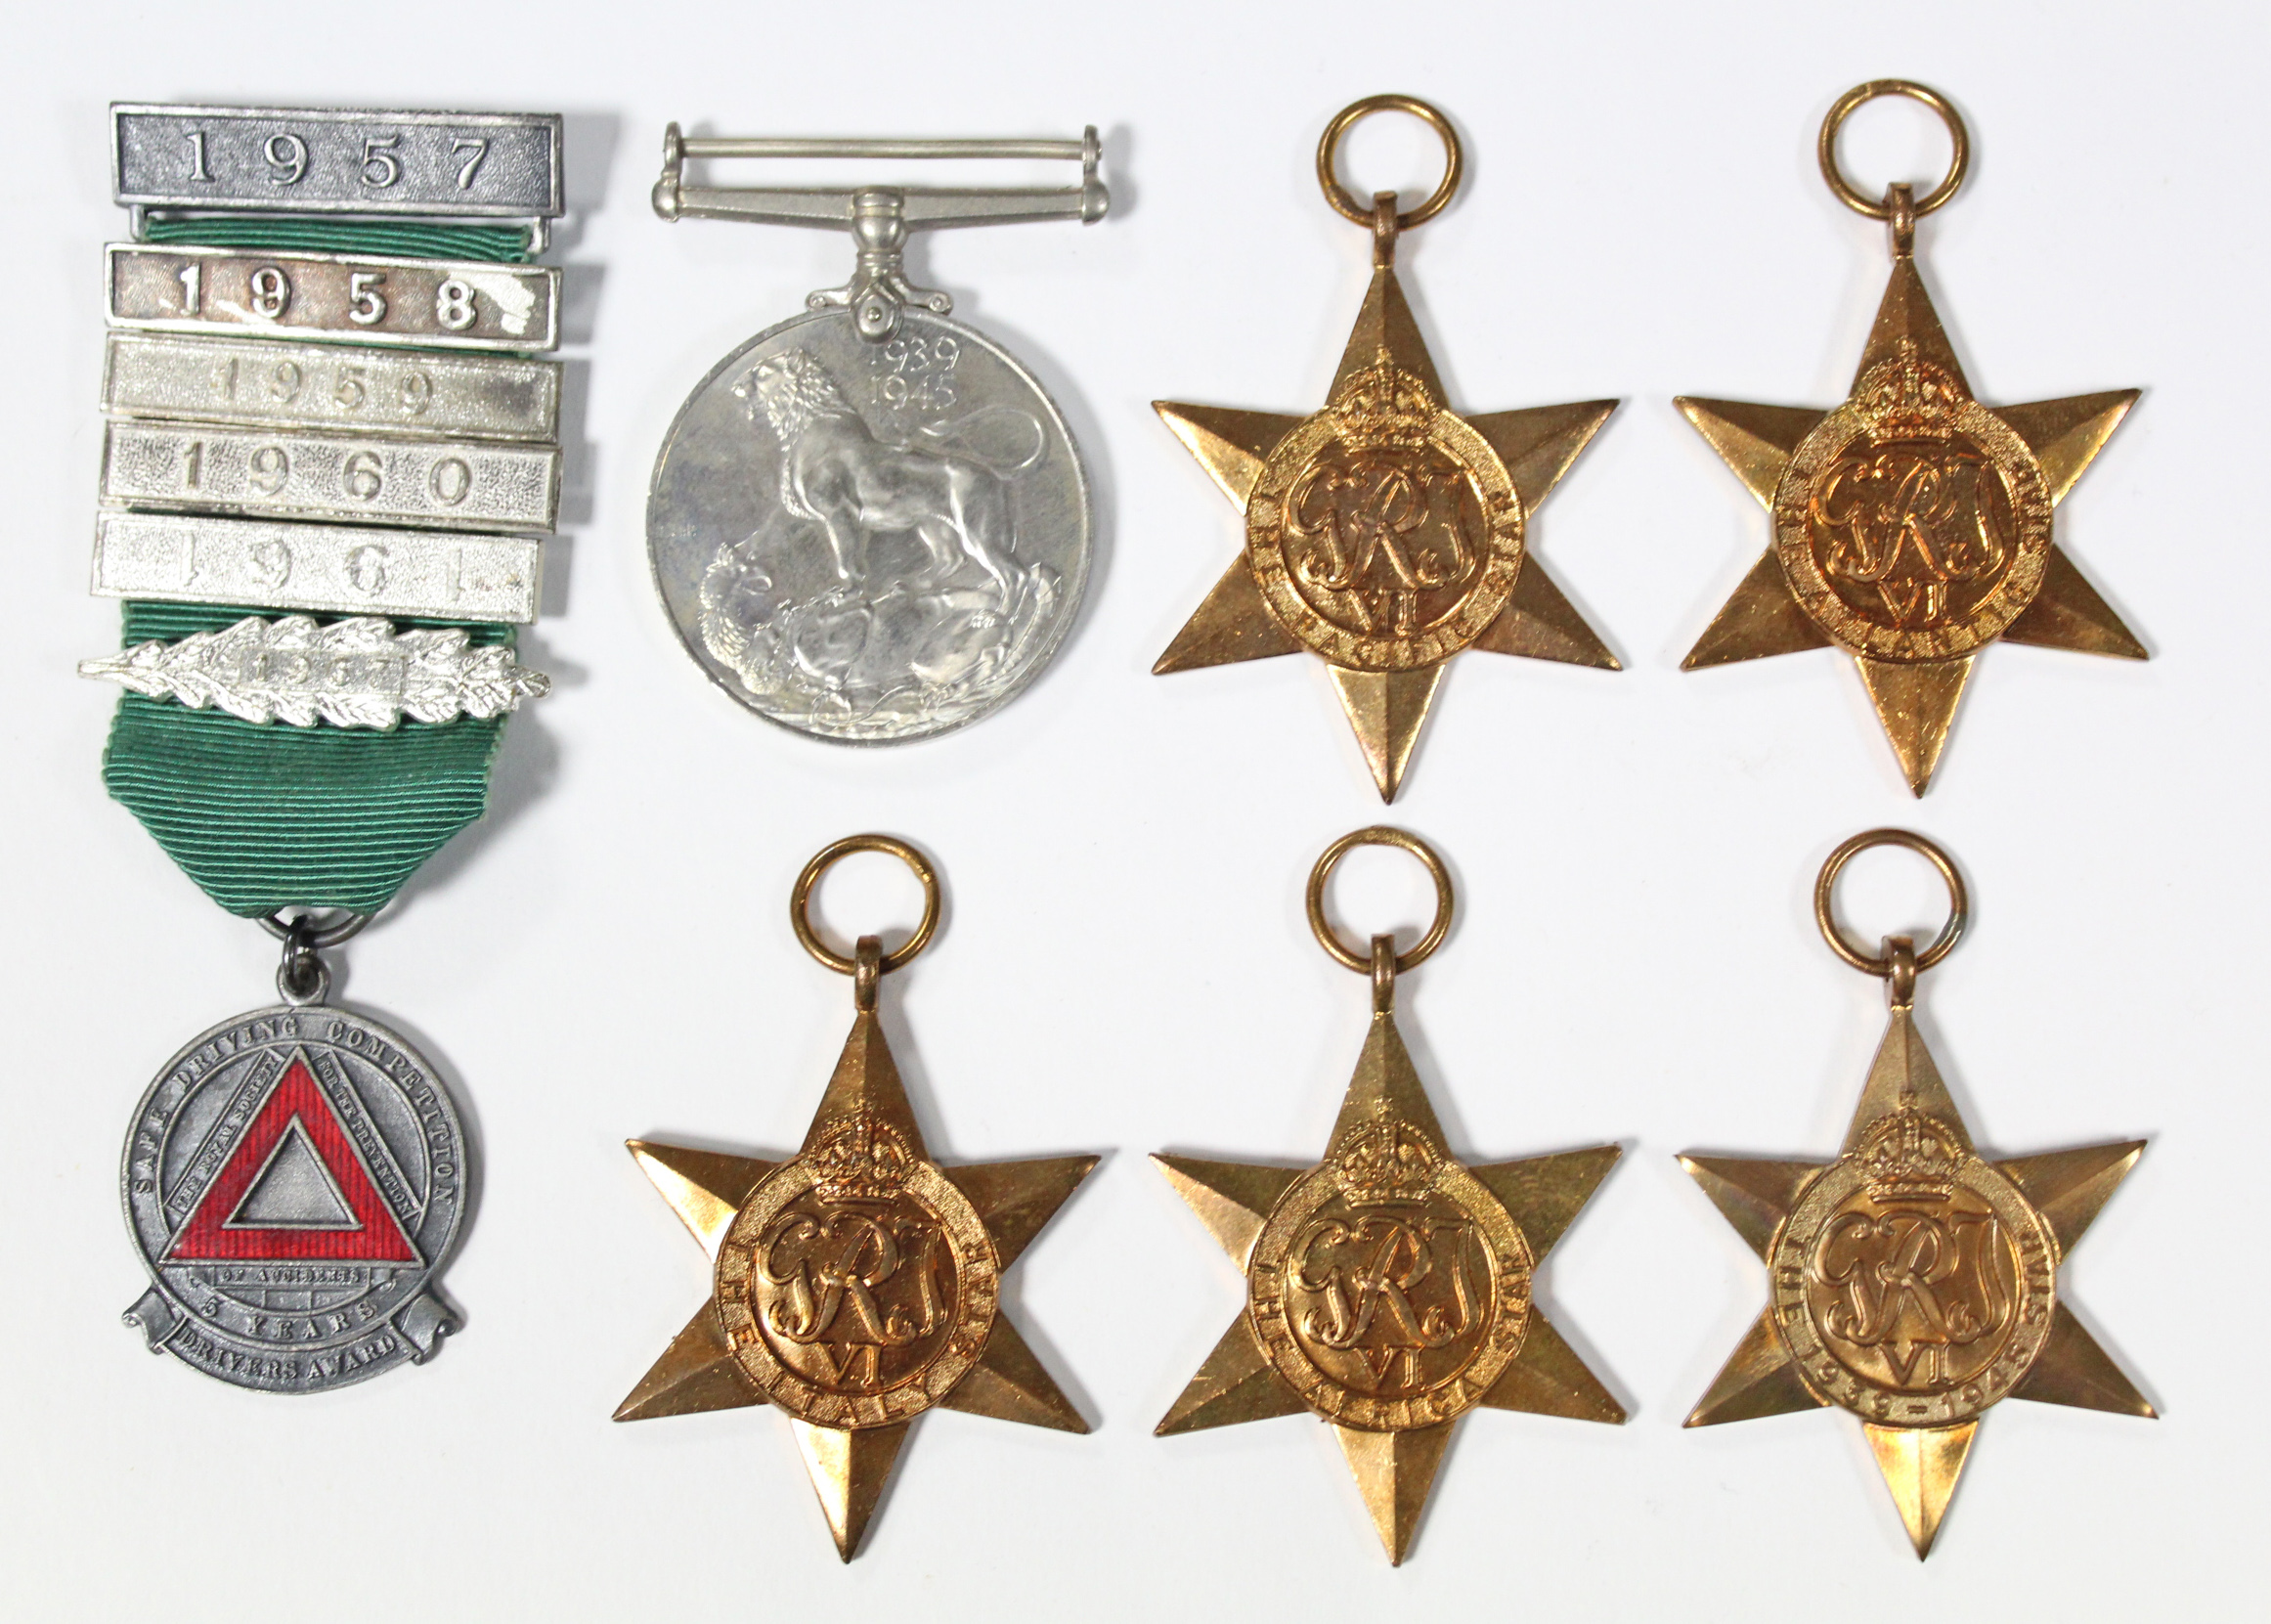 A group of six WWII medals: 1939-45 Star, Atlantic Star, Africa Star, Pacific Star, Italy Star, & - Image 2 of 2